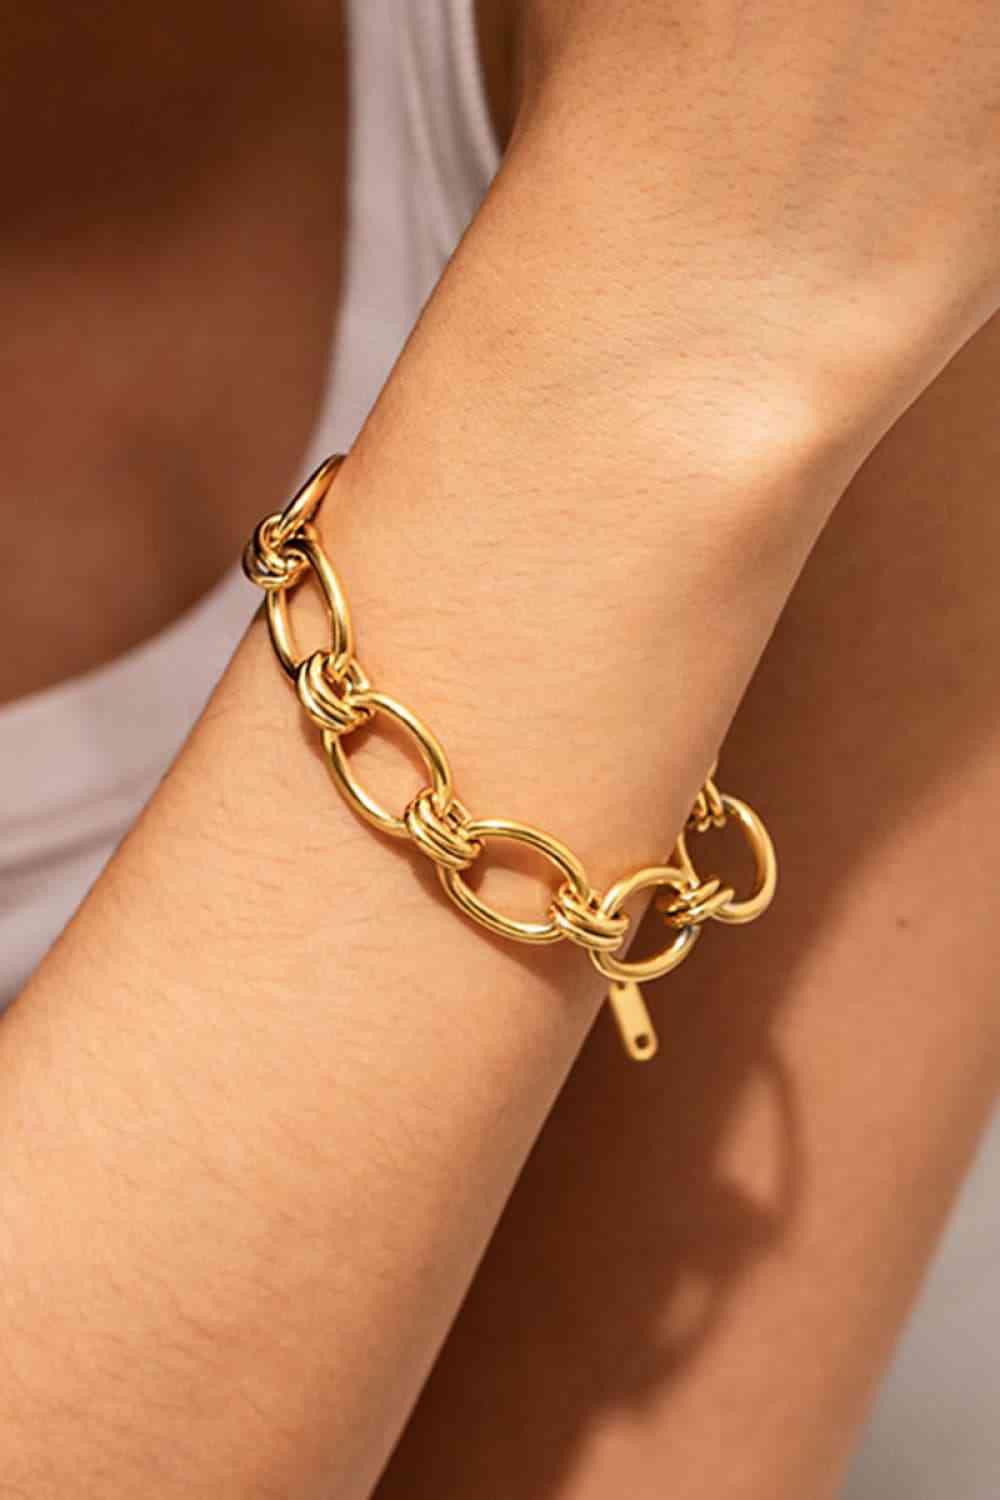 Chunky Chain Stainless Steel 18K Gold-Plated Bracelet - God's Girl Gifts And Apparel